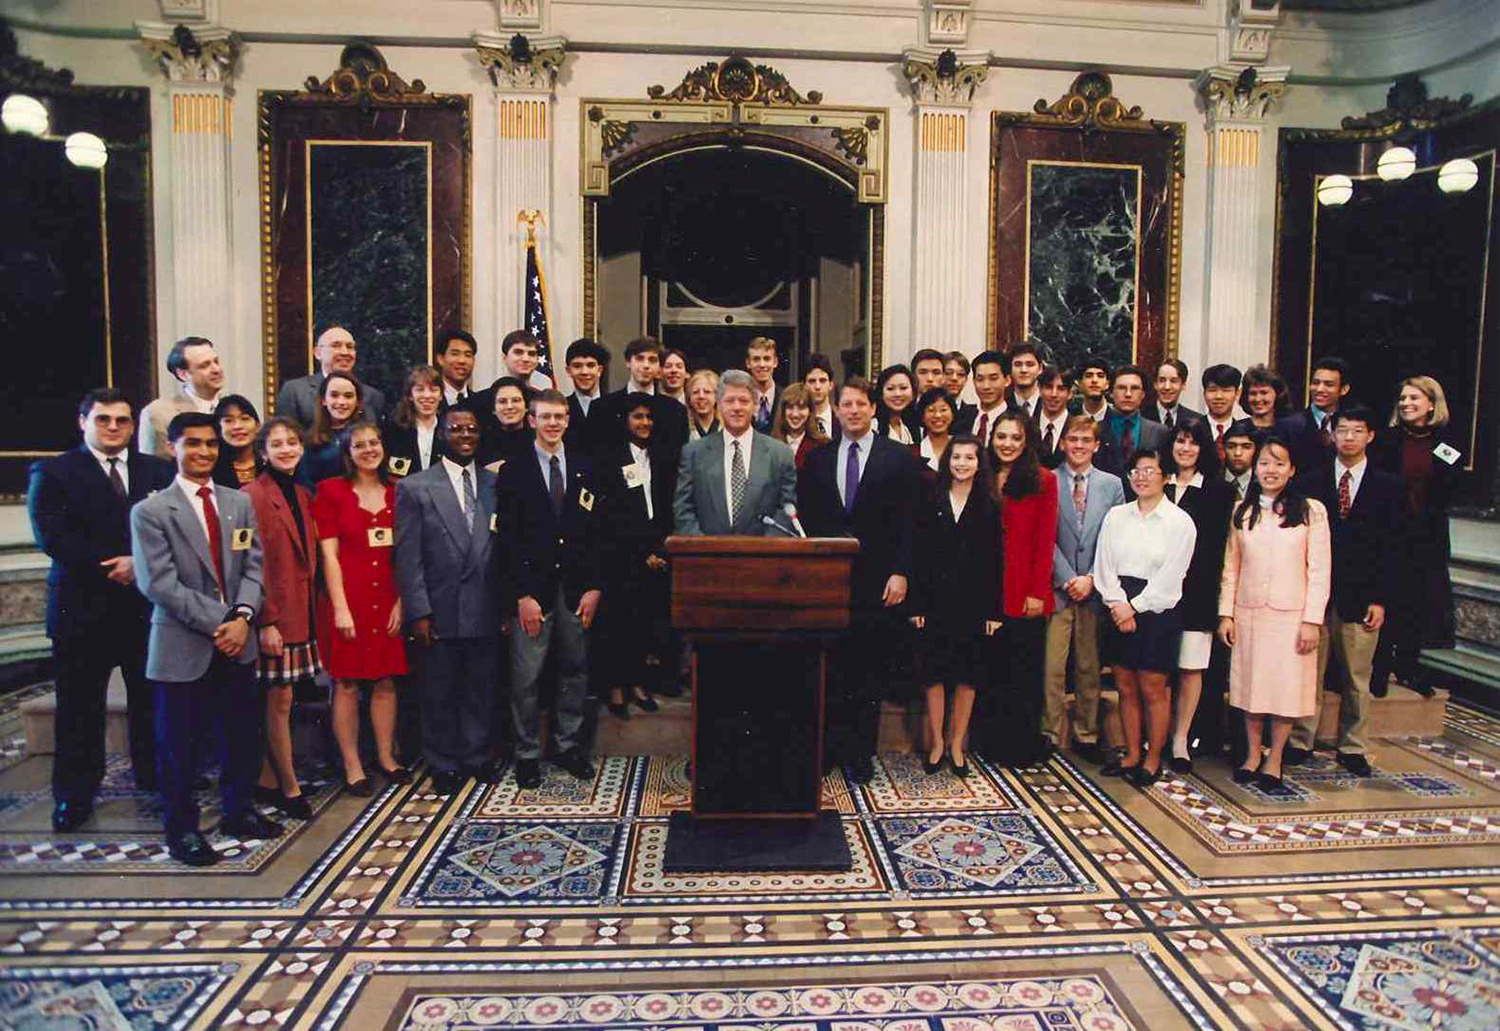 STS finalists meet President Clinton and Vice President Gore at the White House